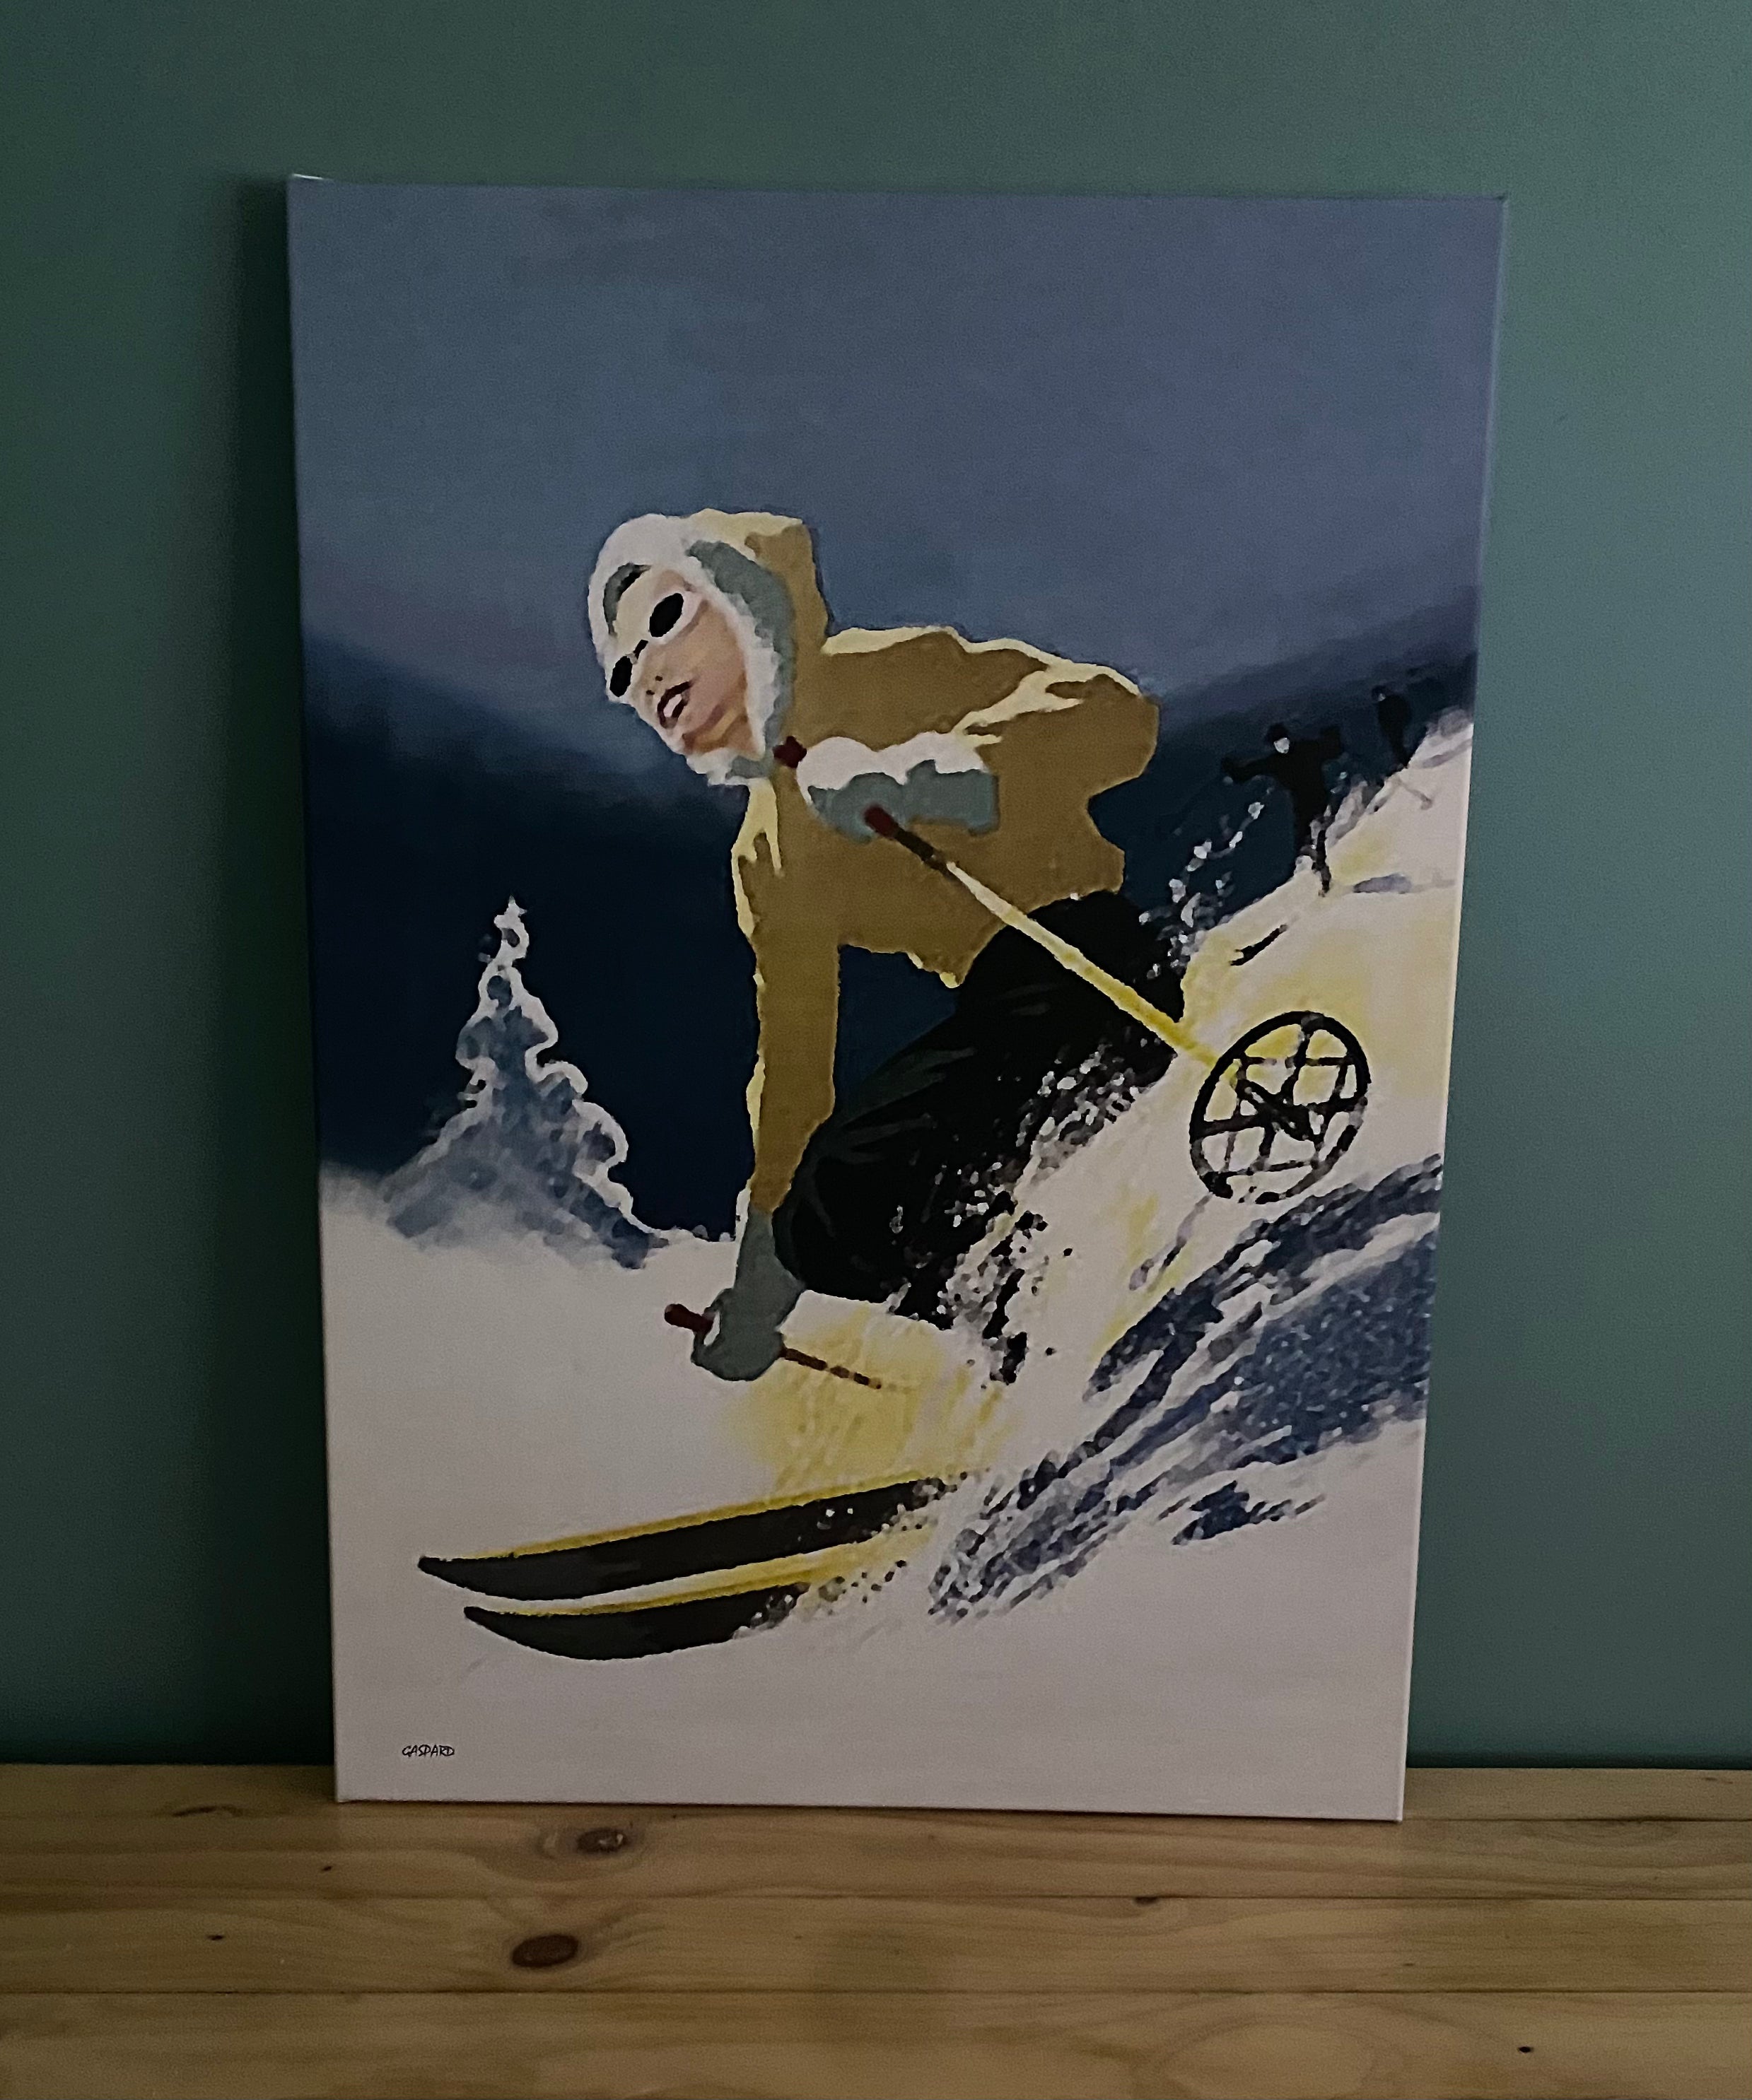 Canvas depicting a woman in a yellow jacket with a white fur at the edge of the hood and blue pants skiing downhill, leaning to the right into the hill with a tree and the shadow of the mountains in the background below a blue sky. Resting against a green wall on a timber table.